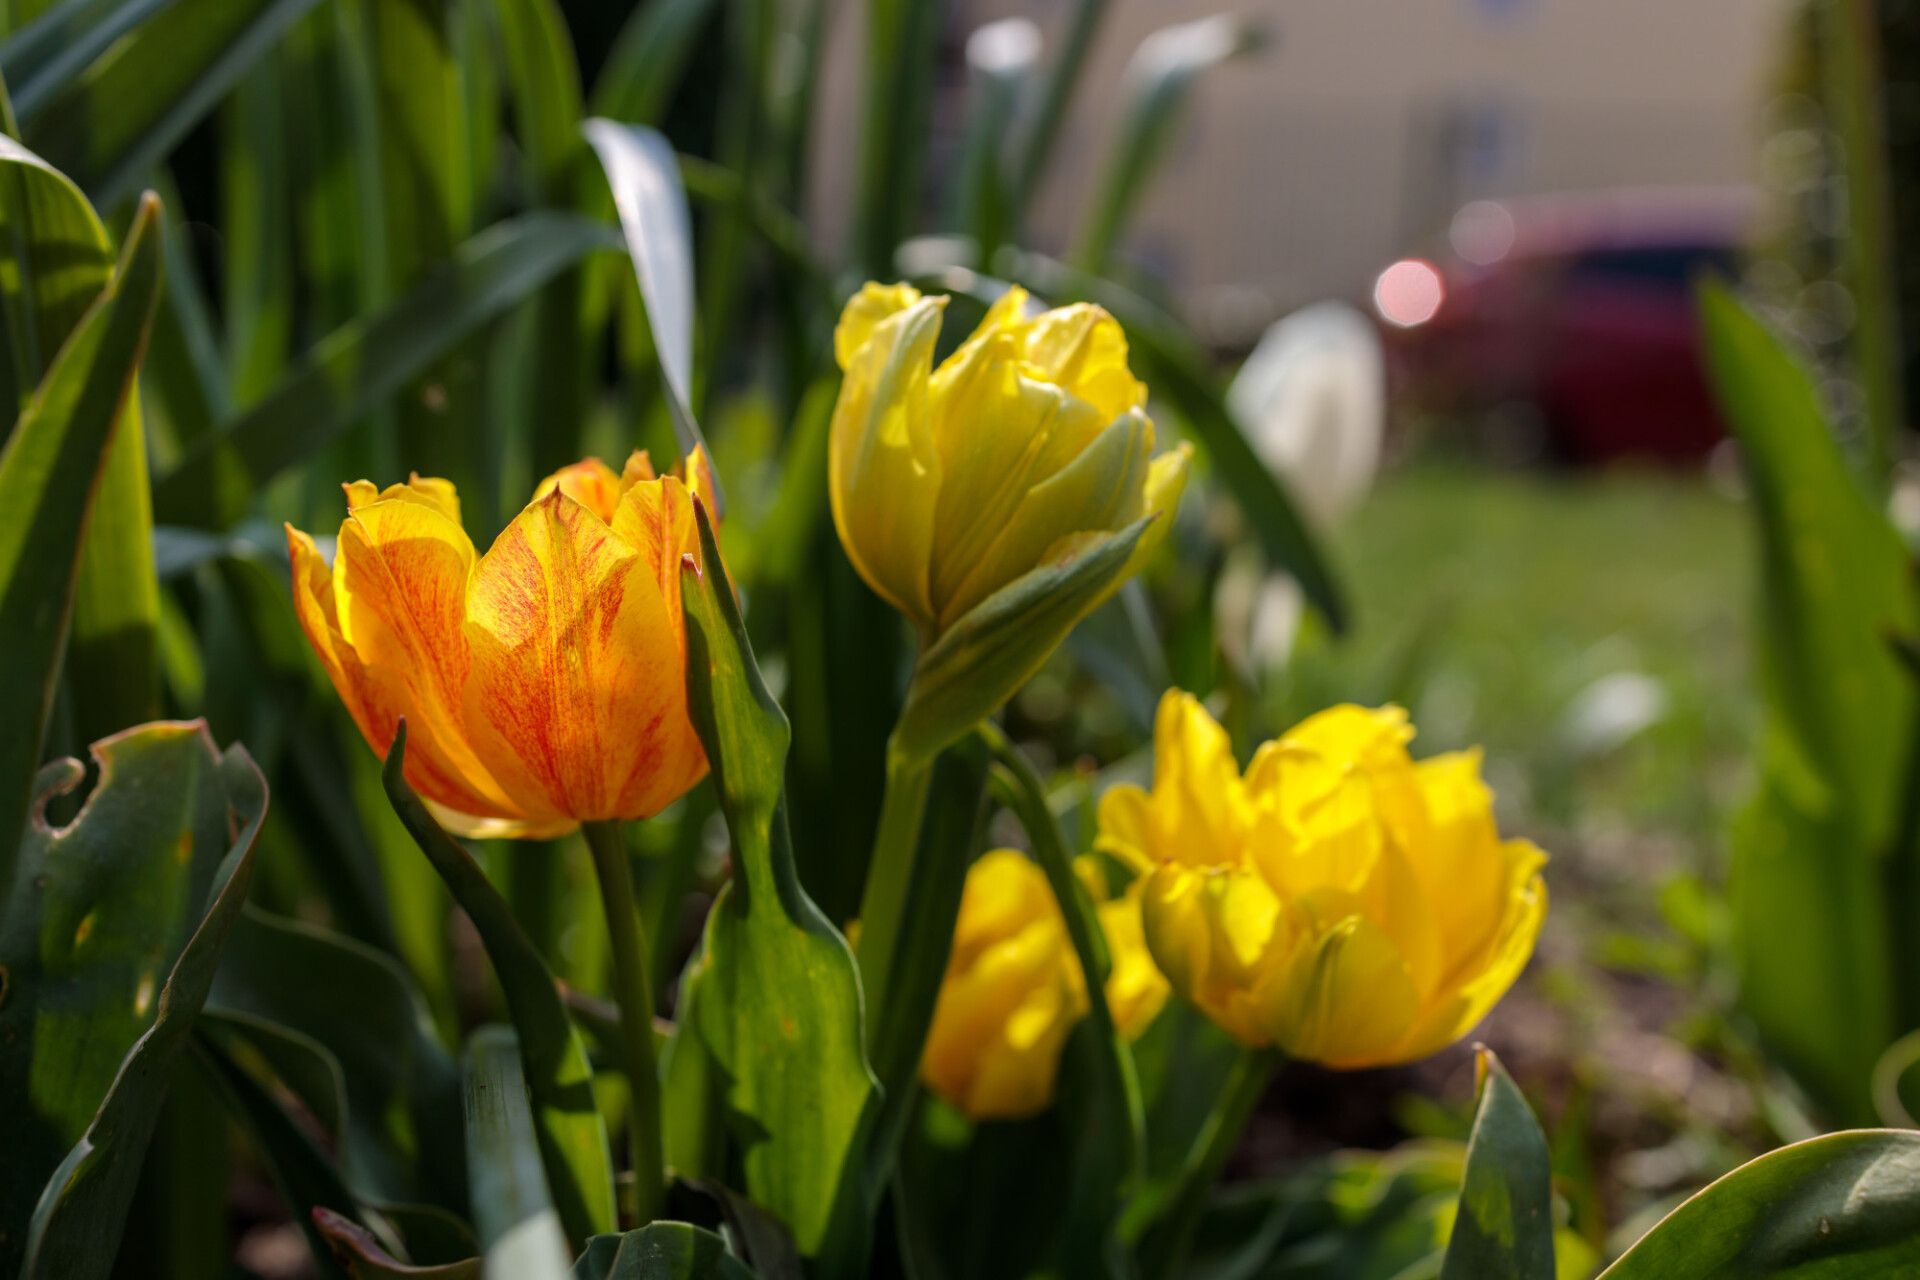 Some yellow tulips in a garden